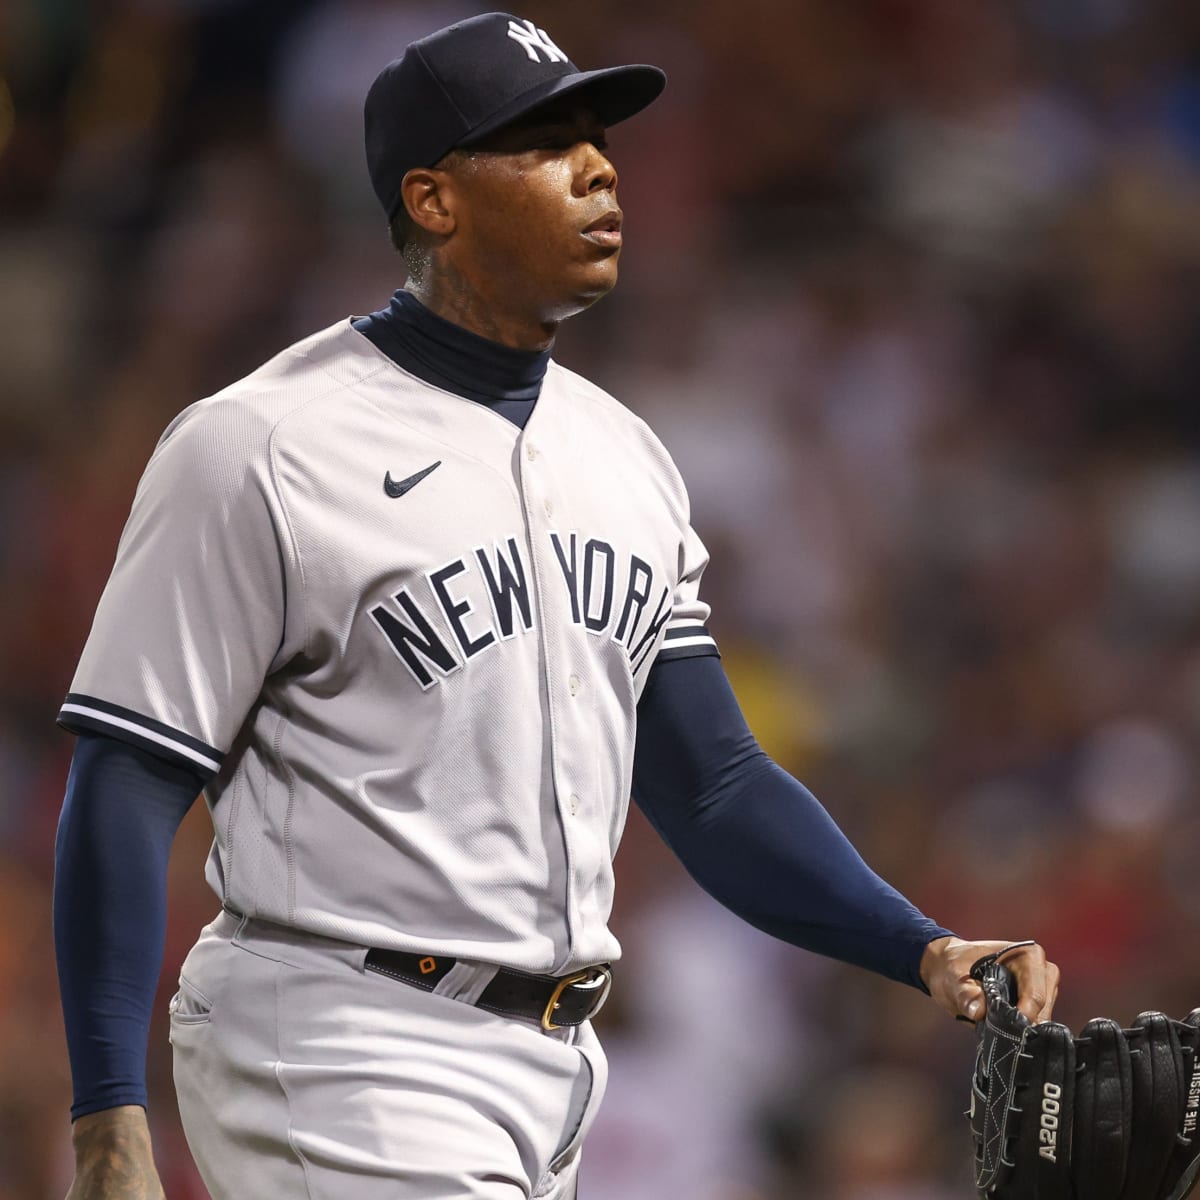 Aroldis Chapman was listed at 6'4 180 lbs at 21 years old. He